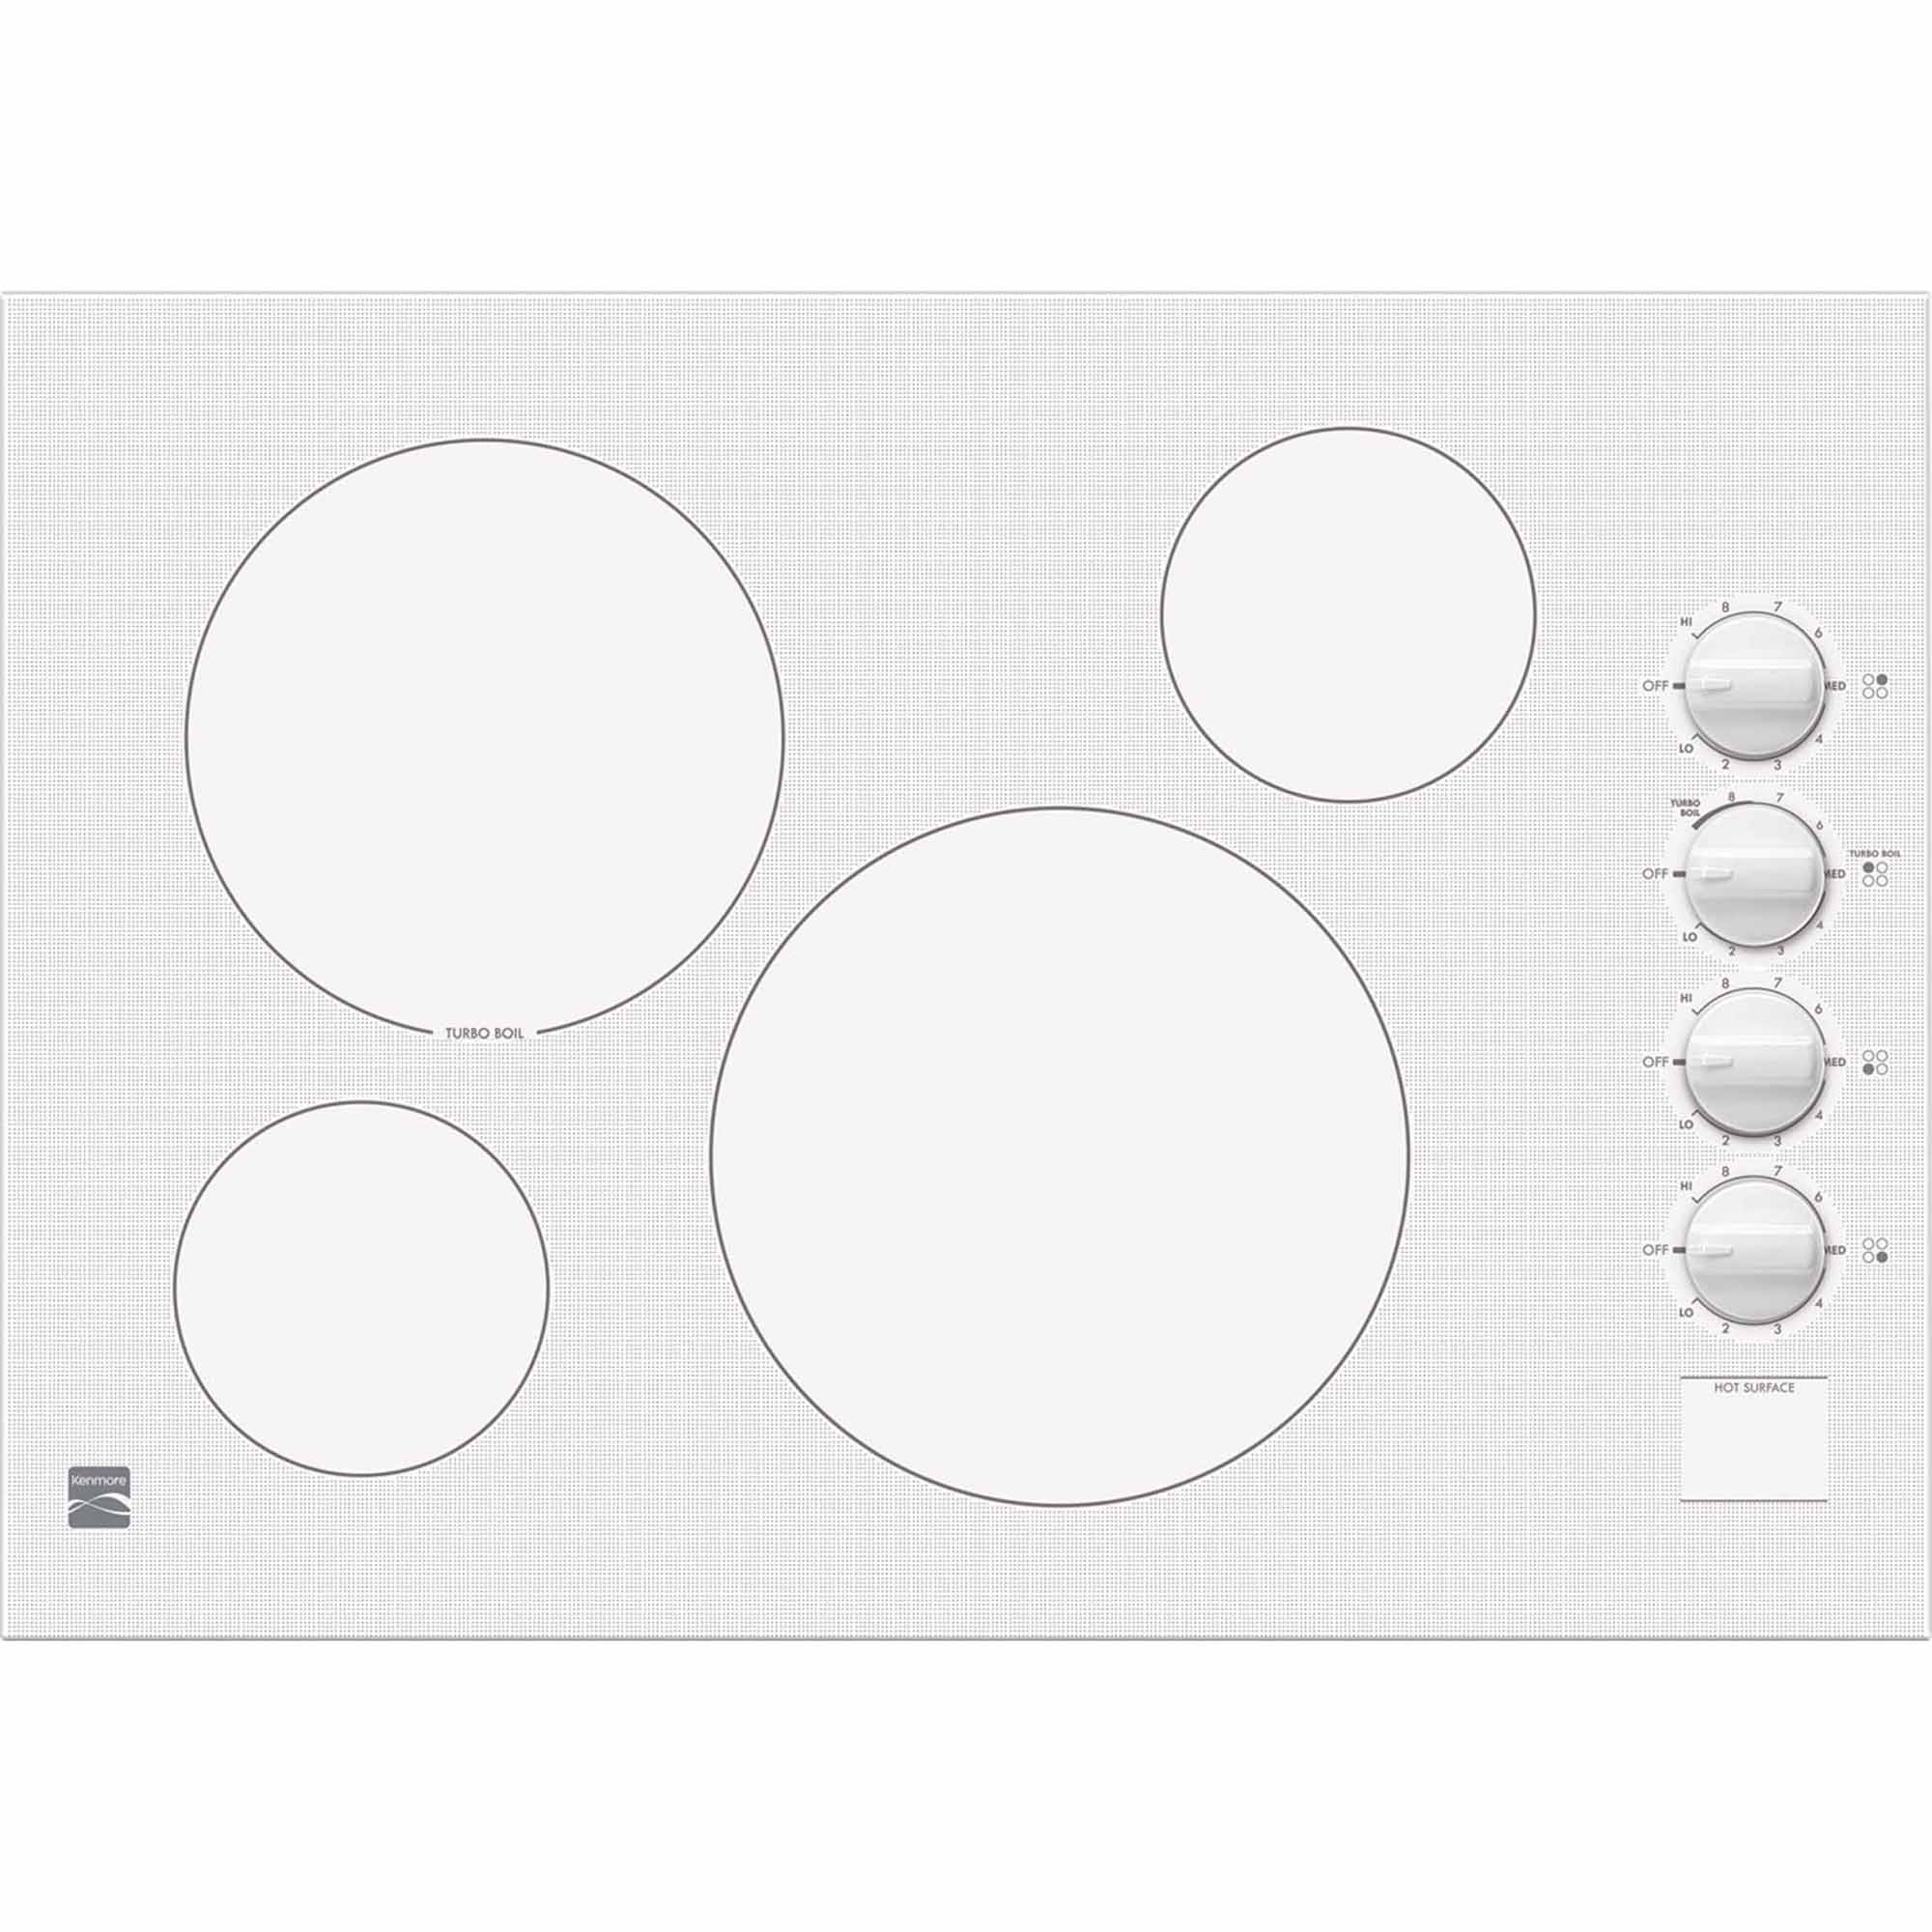 Kenmore 45202 30 Electric Cooktop with Radiant Elements - White